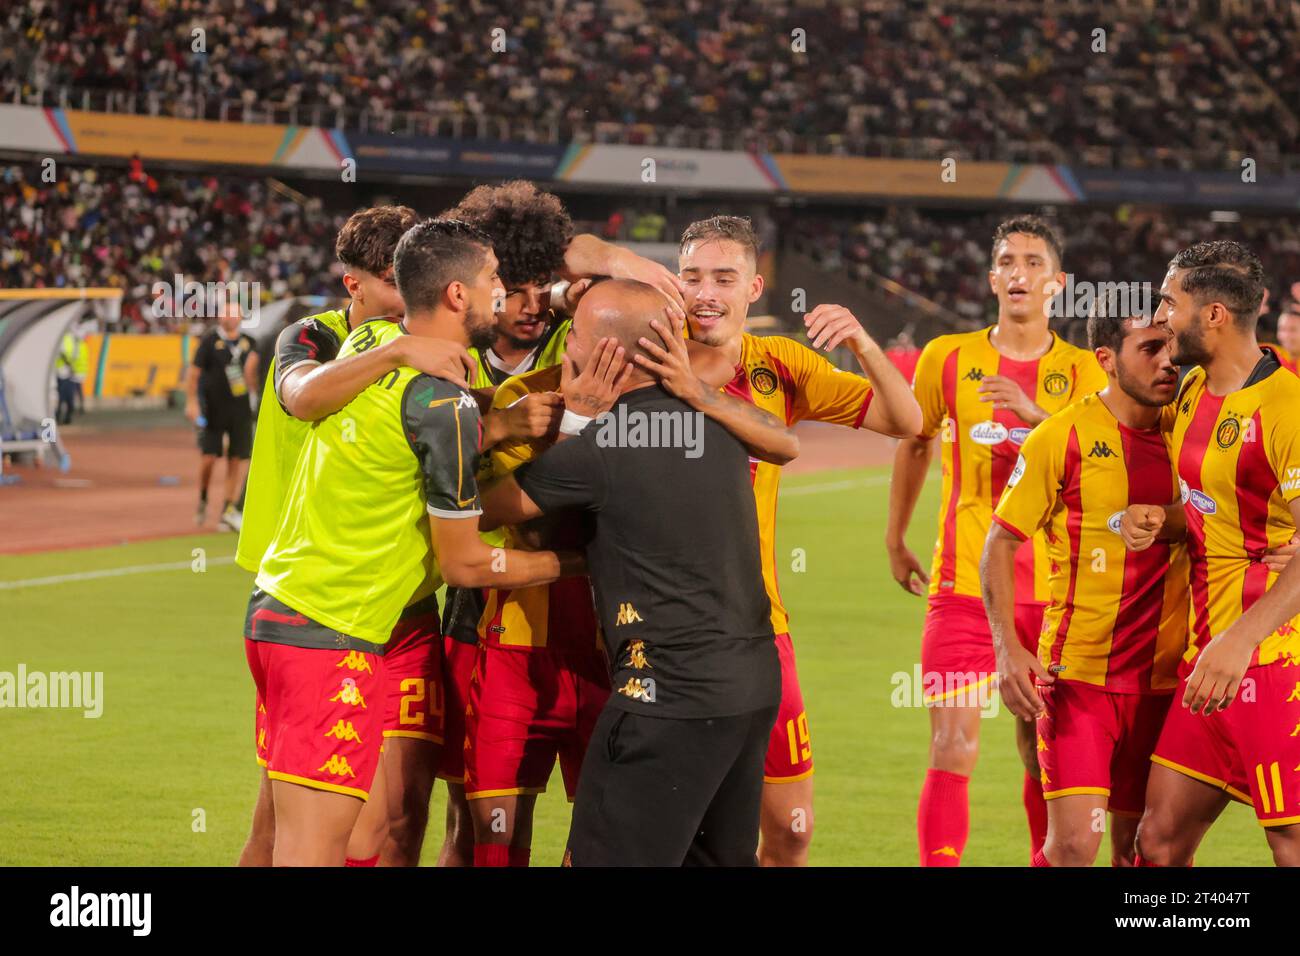 DAR ES SALAAM, TUNISIA – OCTOBER 22:   Esperance celebration during the African Football League match between Tp Mazembe of Congo DR and Esperance ST Stock Photo